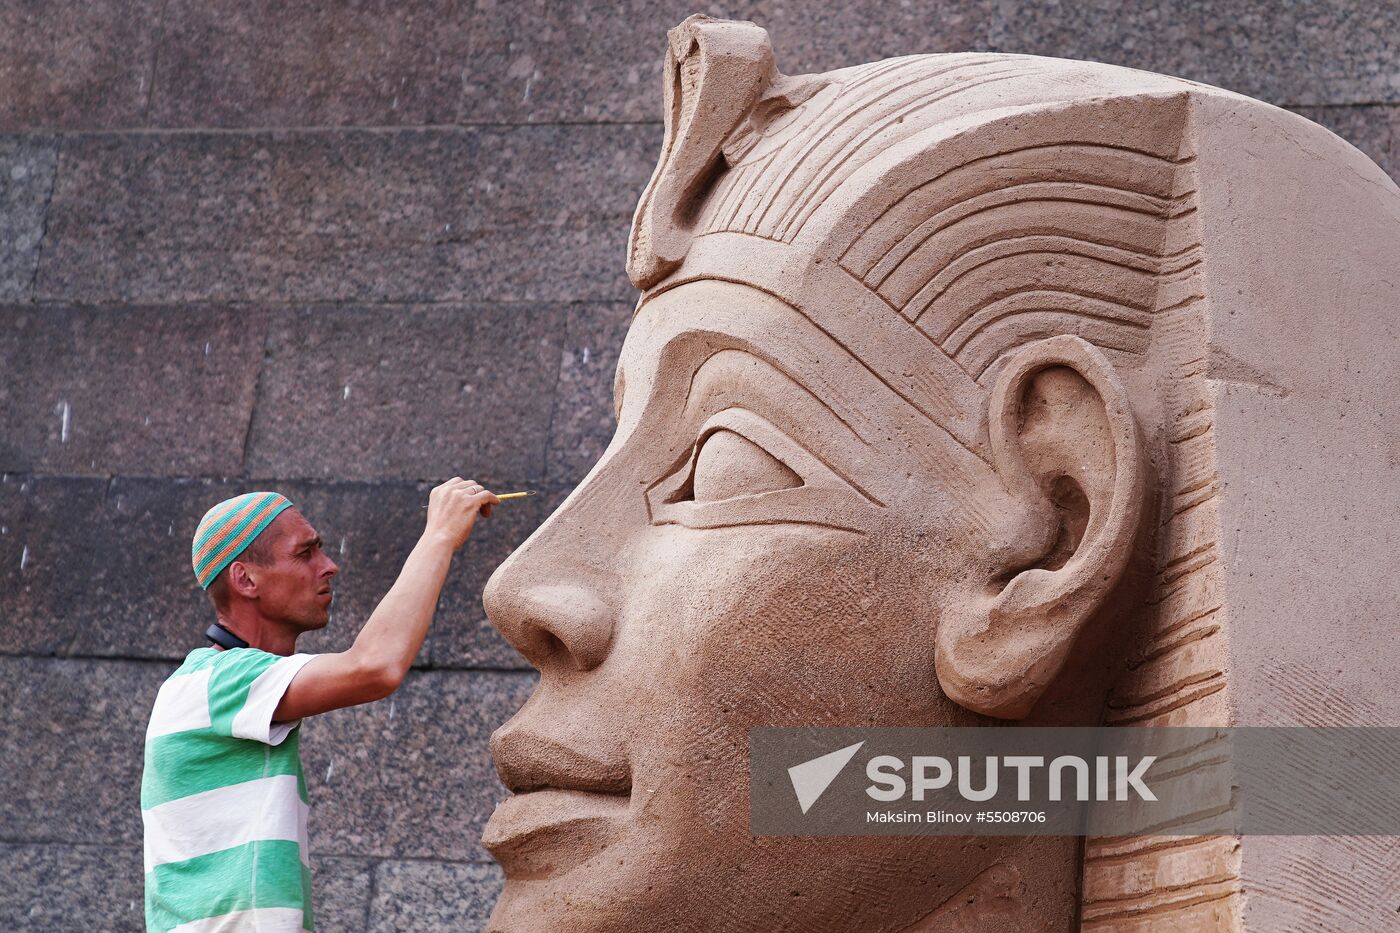 Preparations for opening of sand sculpture festival in St. Petersburg